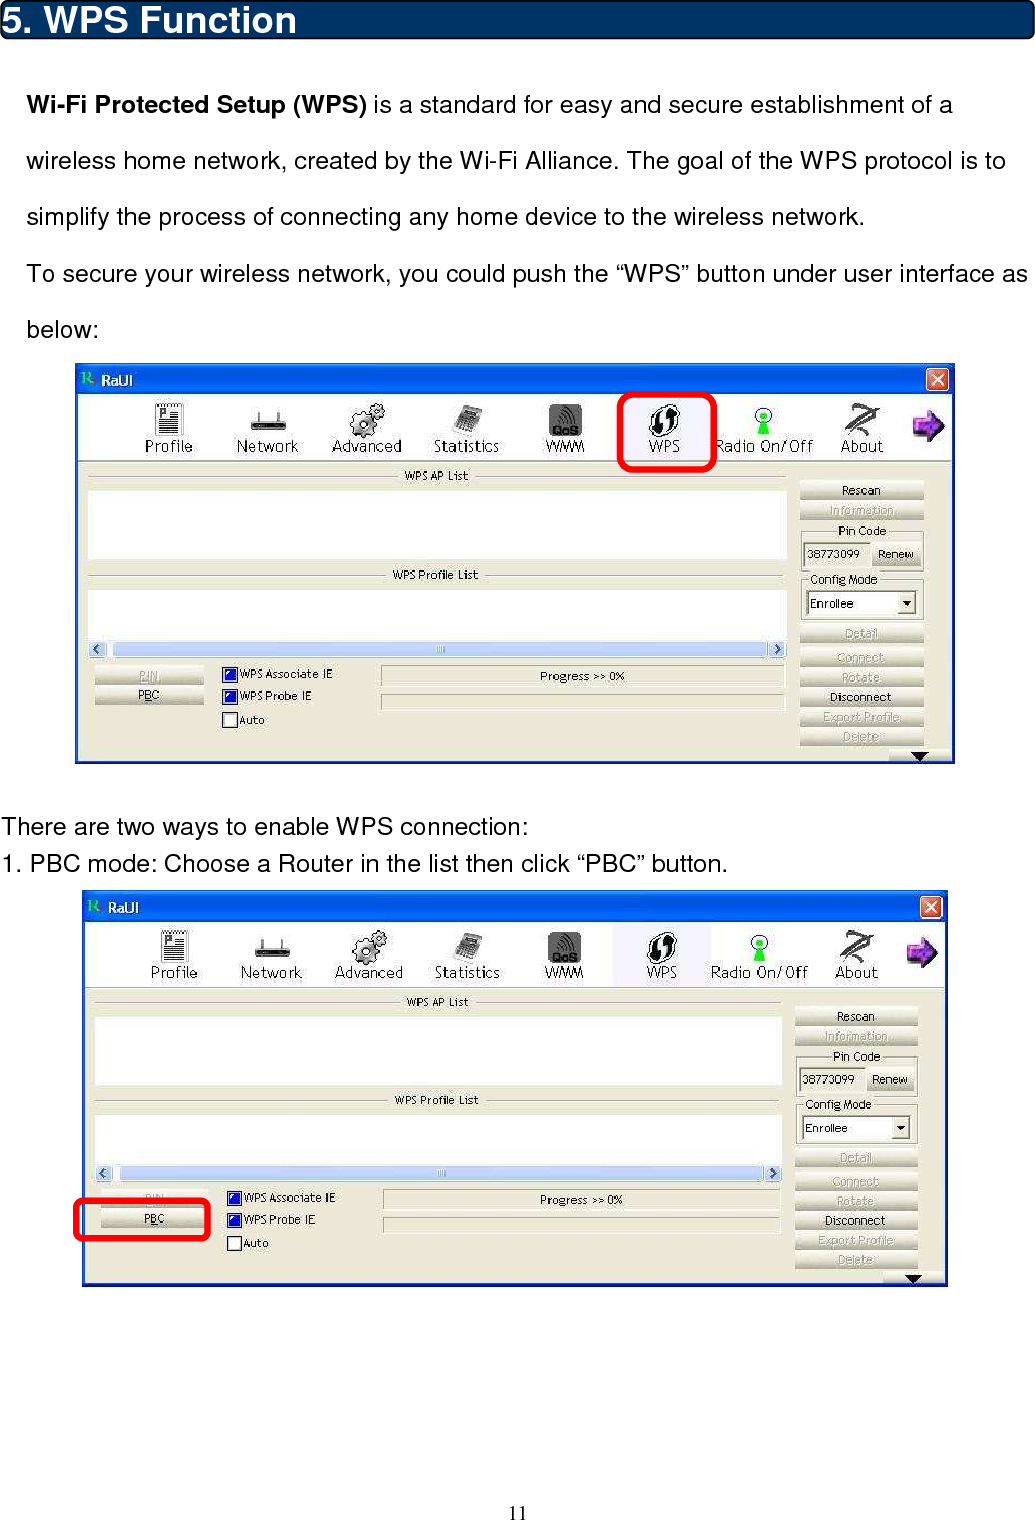  11  5. WPS Function Wi-Fi Protected Setup (WPS) is a standard for easy and secure establishment of a wireless home network, created by the Wi-Fi Alliance. The goal of the WPS protocol is to simplify the process of connecting any home device to the wireless network. To secure your wireless network, you could push the “WPS” button under user interface as below:                                         There are two ways to enable WPS connection: 1. PBC mode: Choose a Router in the list then click “PBC” button.      